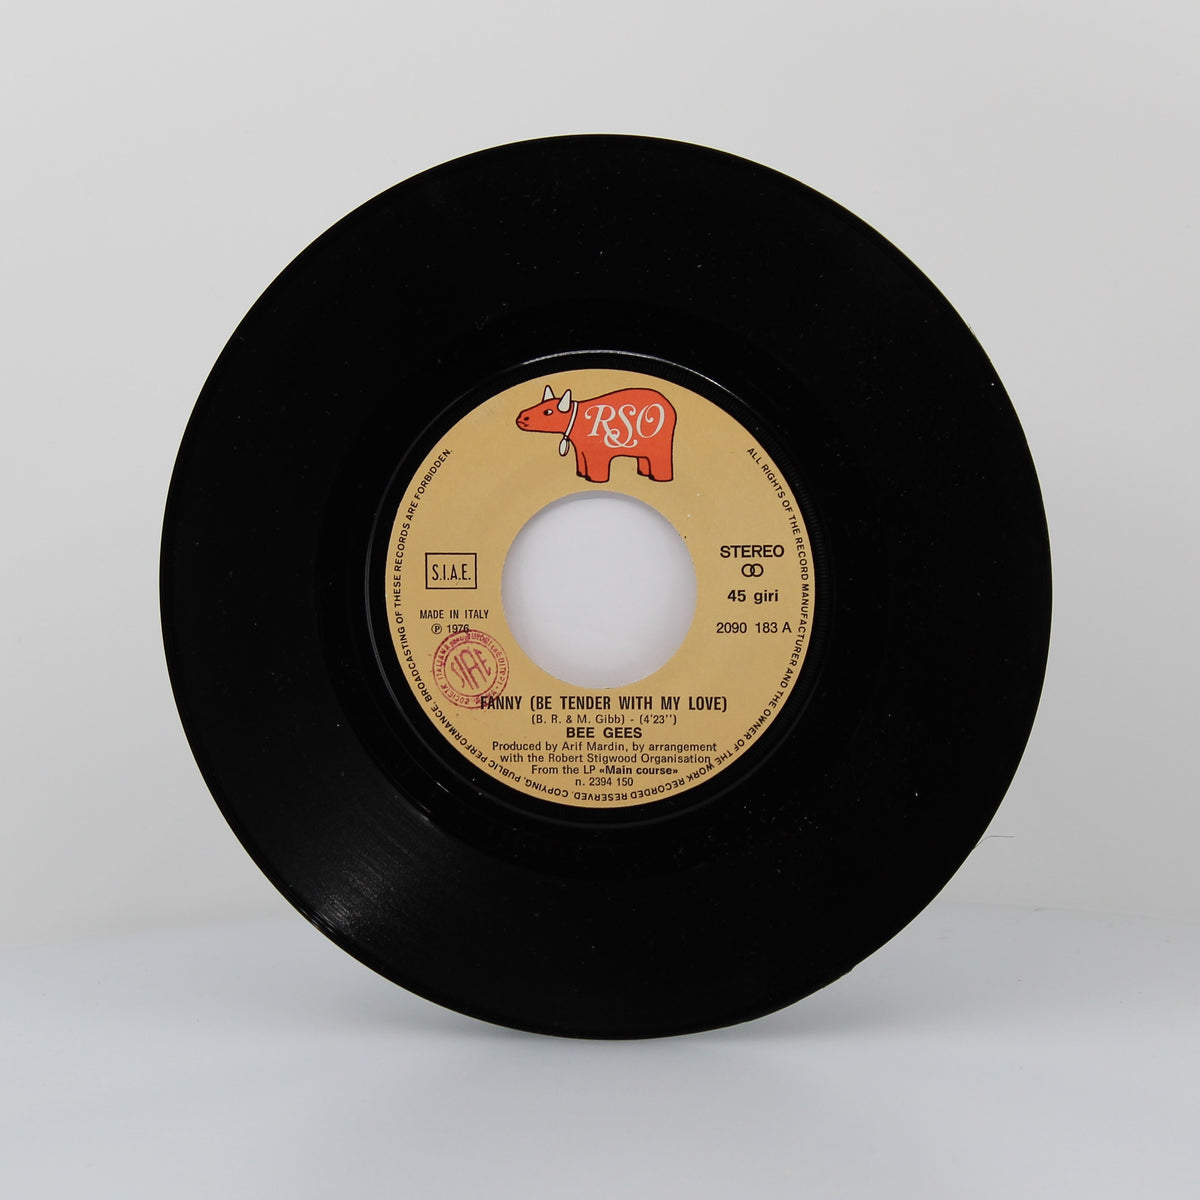 Bee Gees - Fanny (Be Tender With My Love), Vinyl 7&quot; Single 45Rpm, Italy 1976